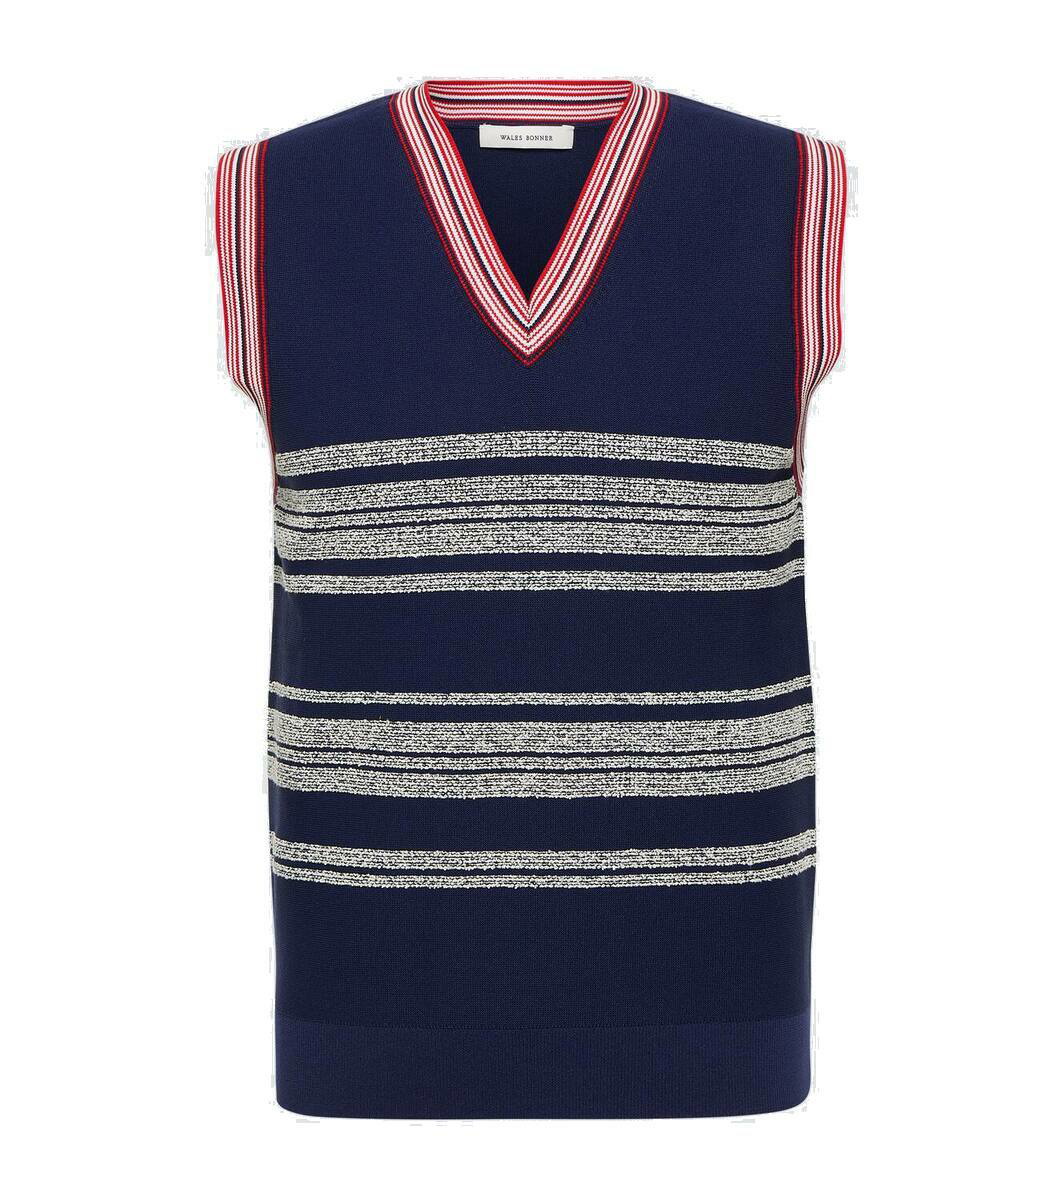 Photo: Wales Bonner Shade striped sweater vest